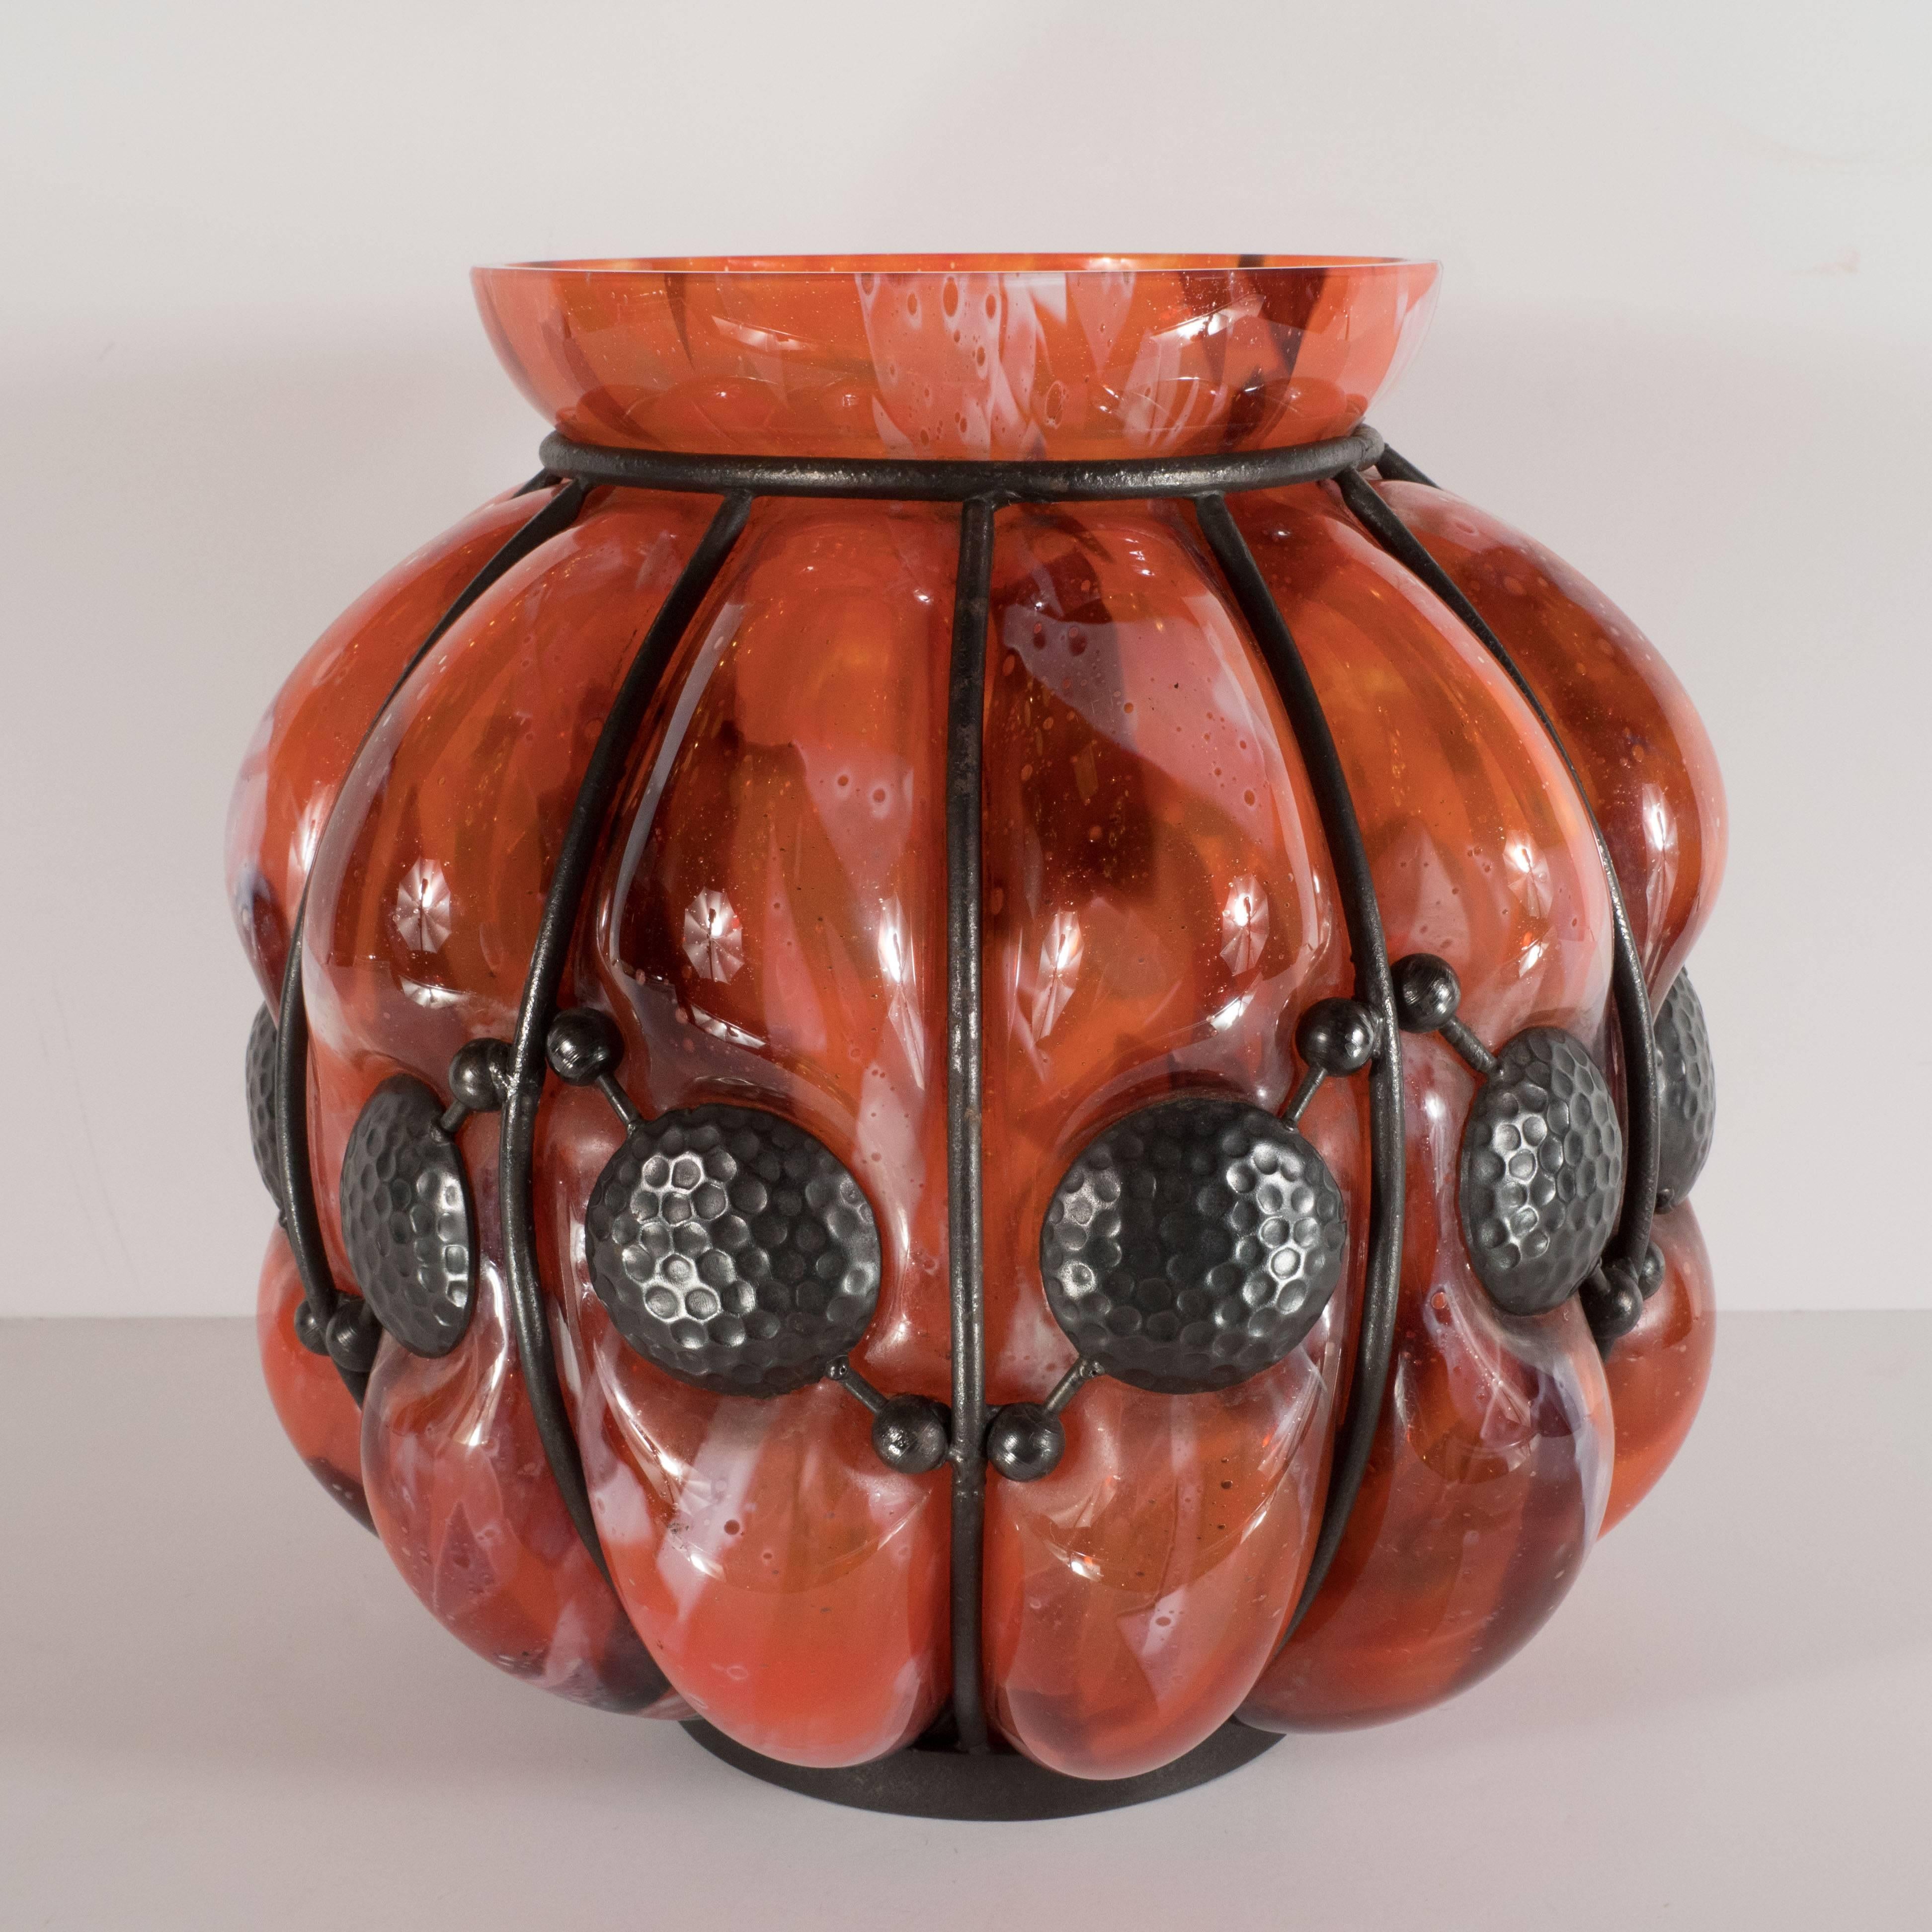 This rare and unique glass vase was handblown by Majorelle & Daum- one of the most renowned glass studios of the period- in France, circa 1930. Realized in mottled Vermillion glass-with hints of crimson and cream- the piece exhibits a subtle